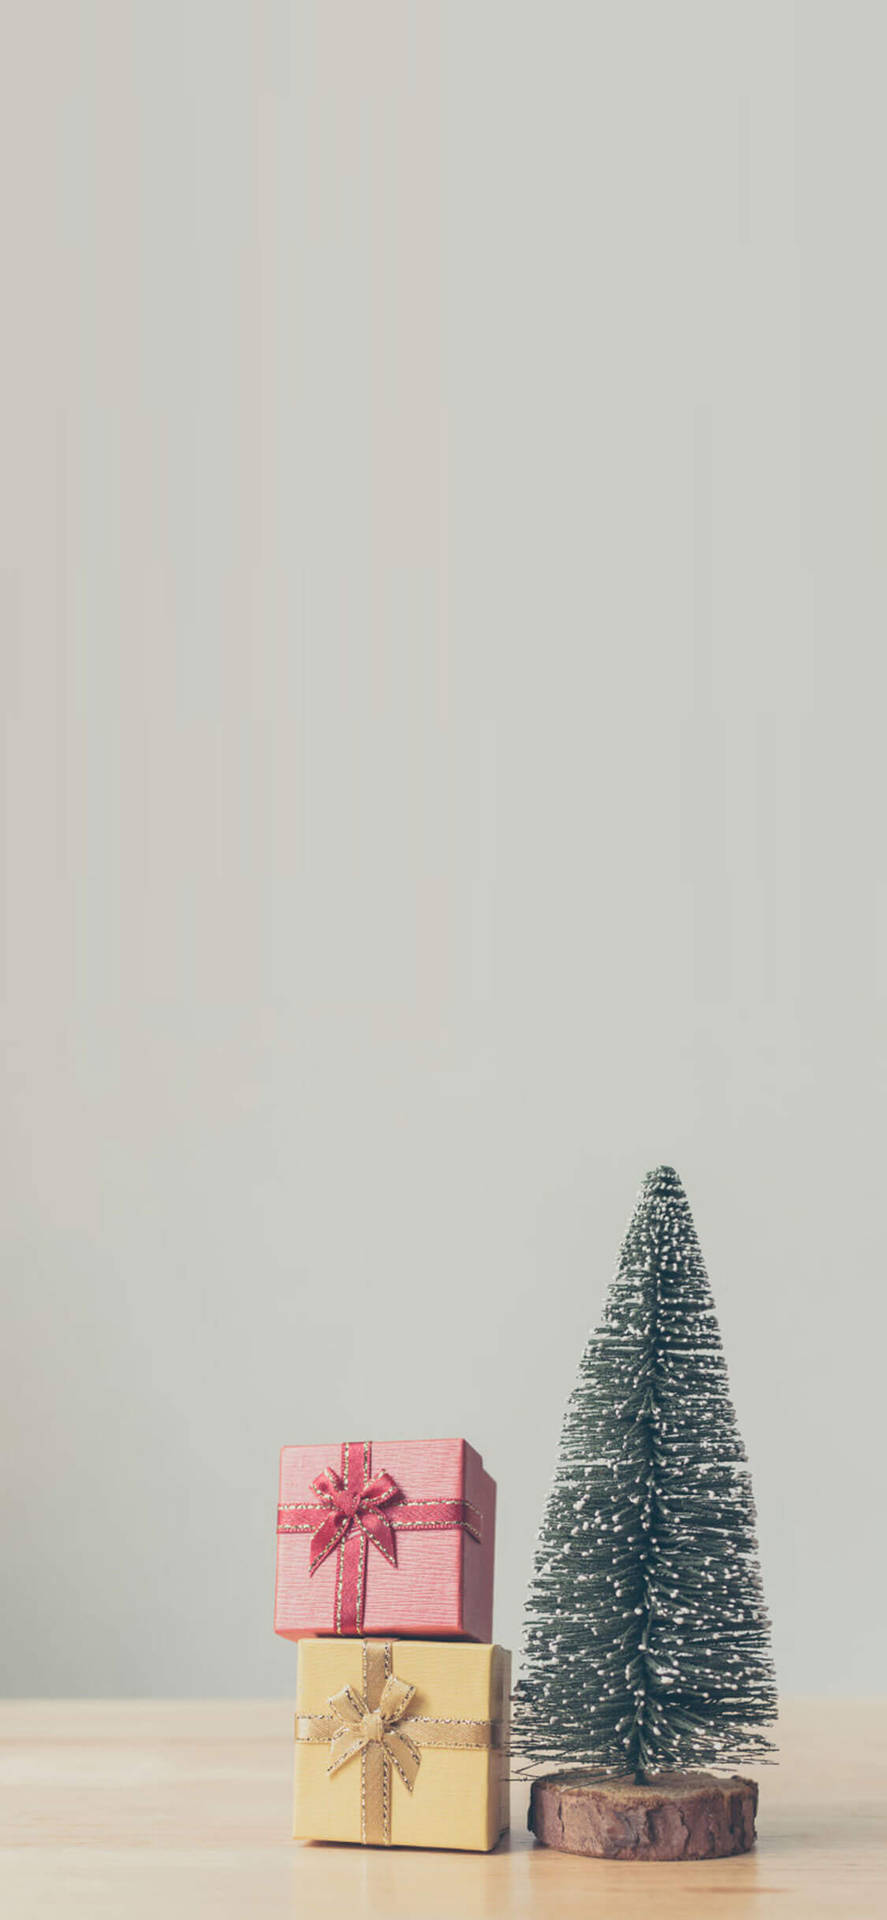 Christmas Pine Tree And Gifts Iphone Background